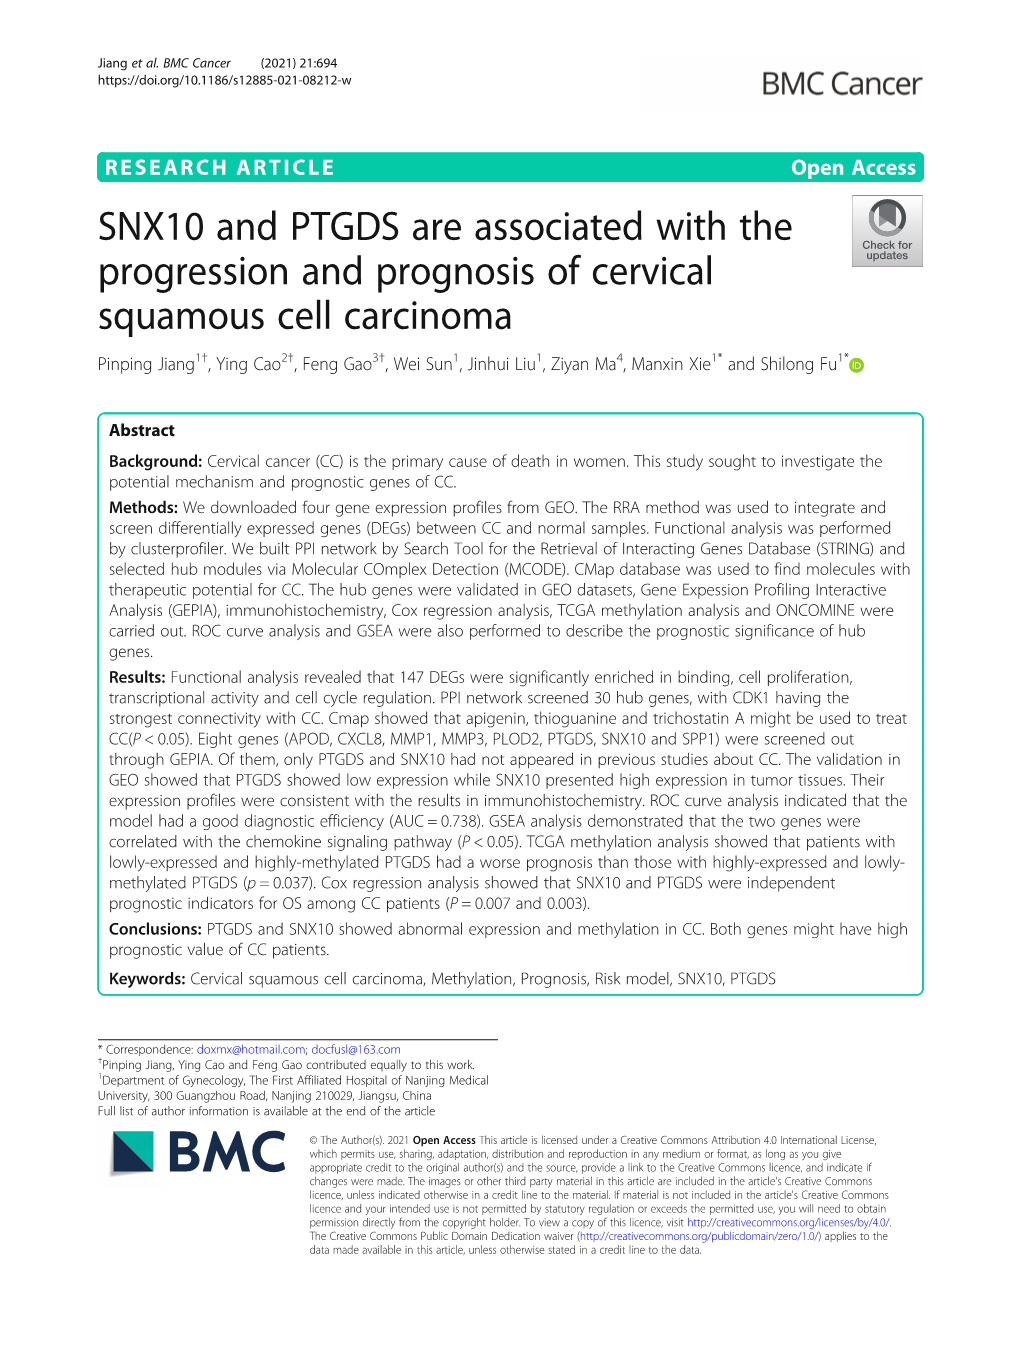 SNX10 and PTGDS Are Associated with the Progression and Prognosis